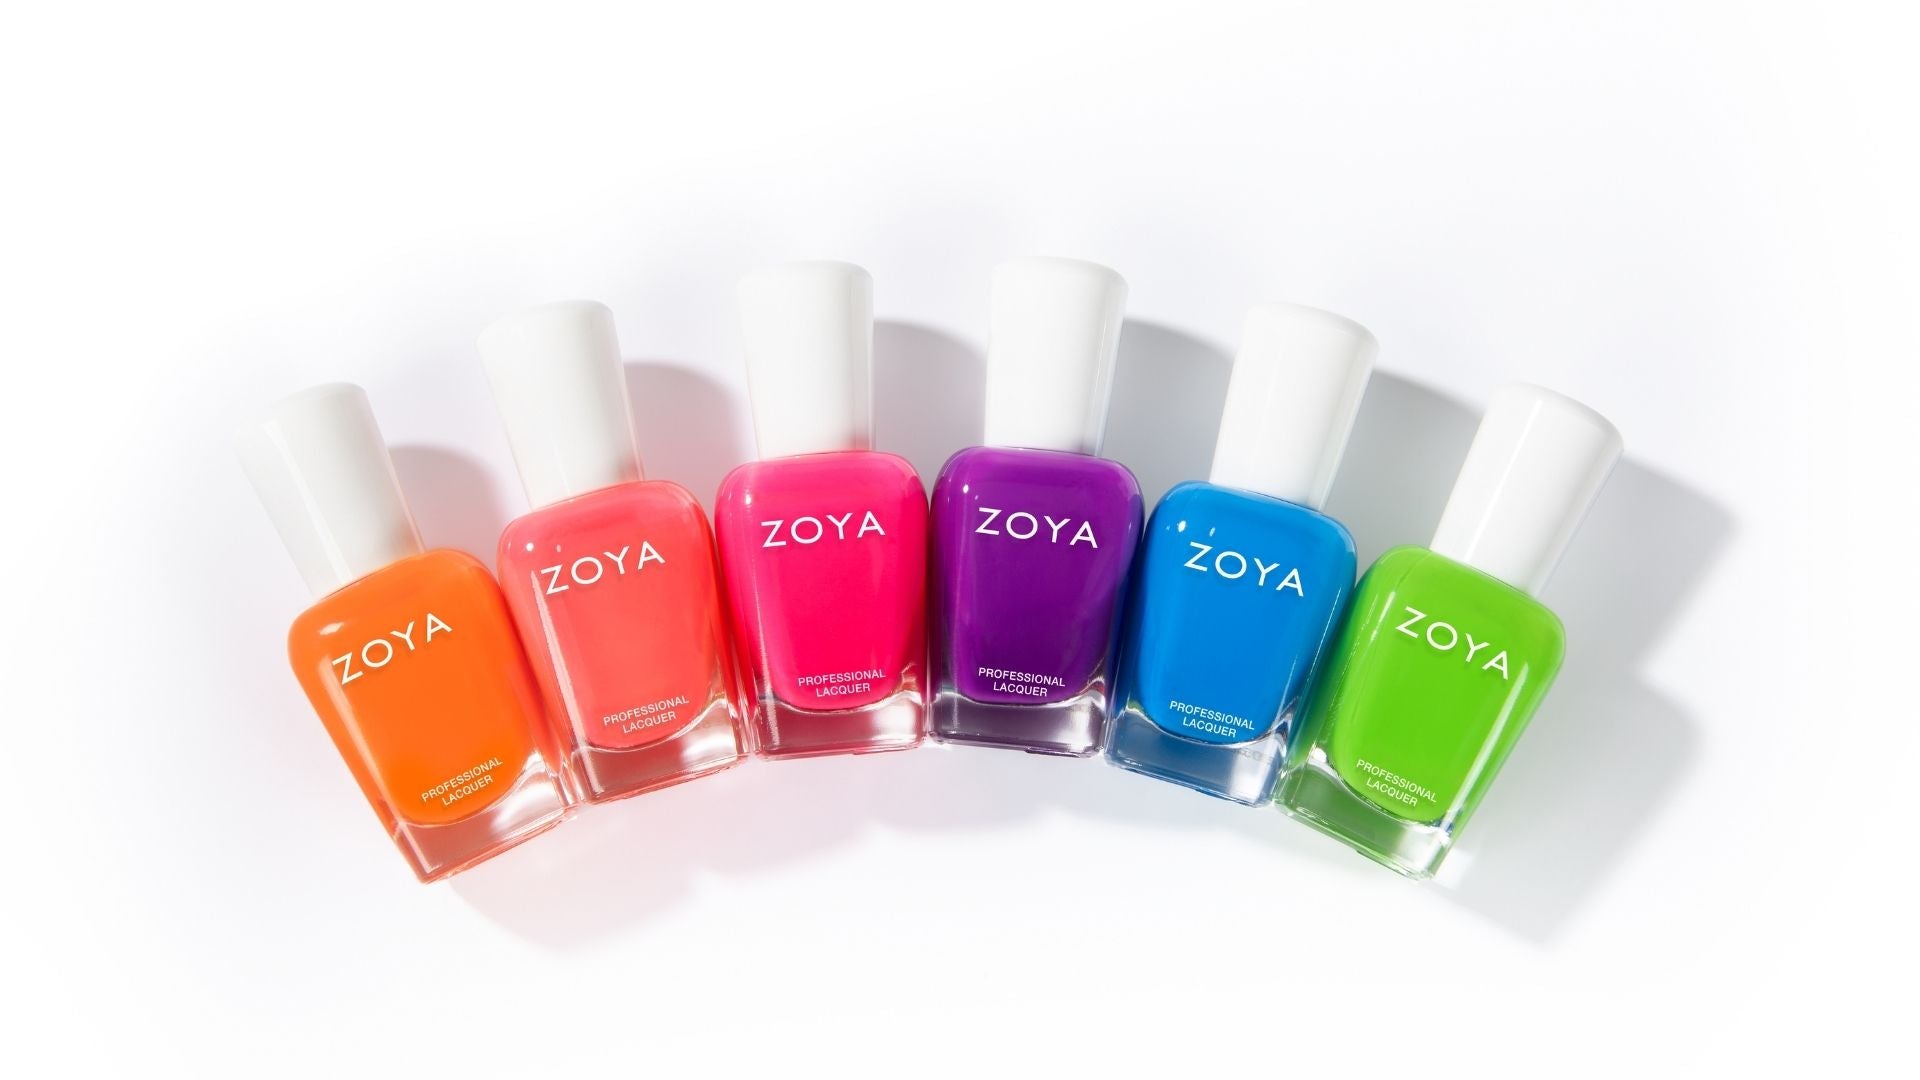 review, photos, ingredients, trends, nail polish, zoya, easy neon, nail polish collection, oakley, zelda, janie, banks, echo, link, best new summer nail polishes, bright neon nail polishes